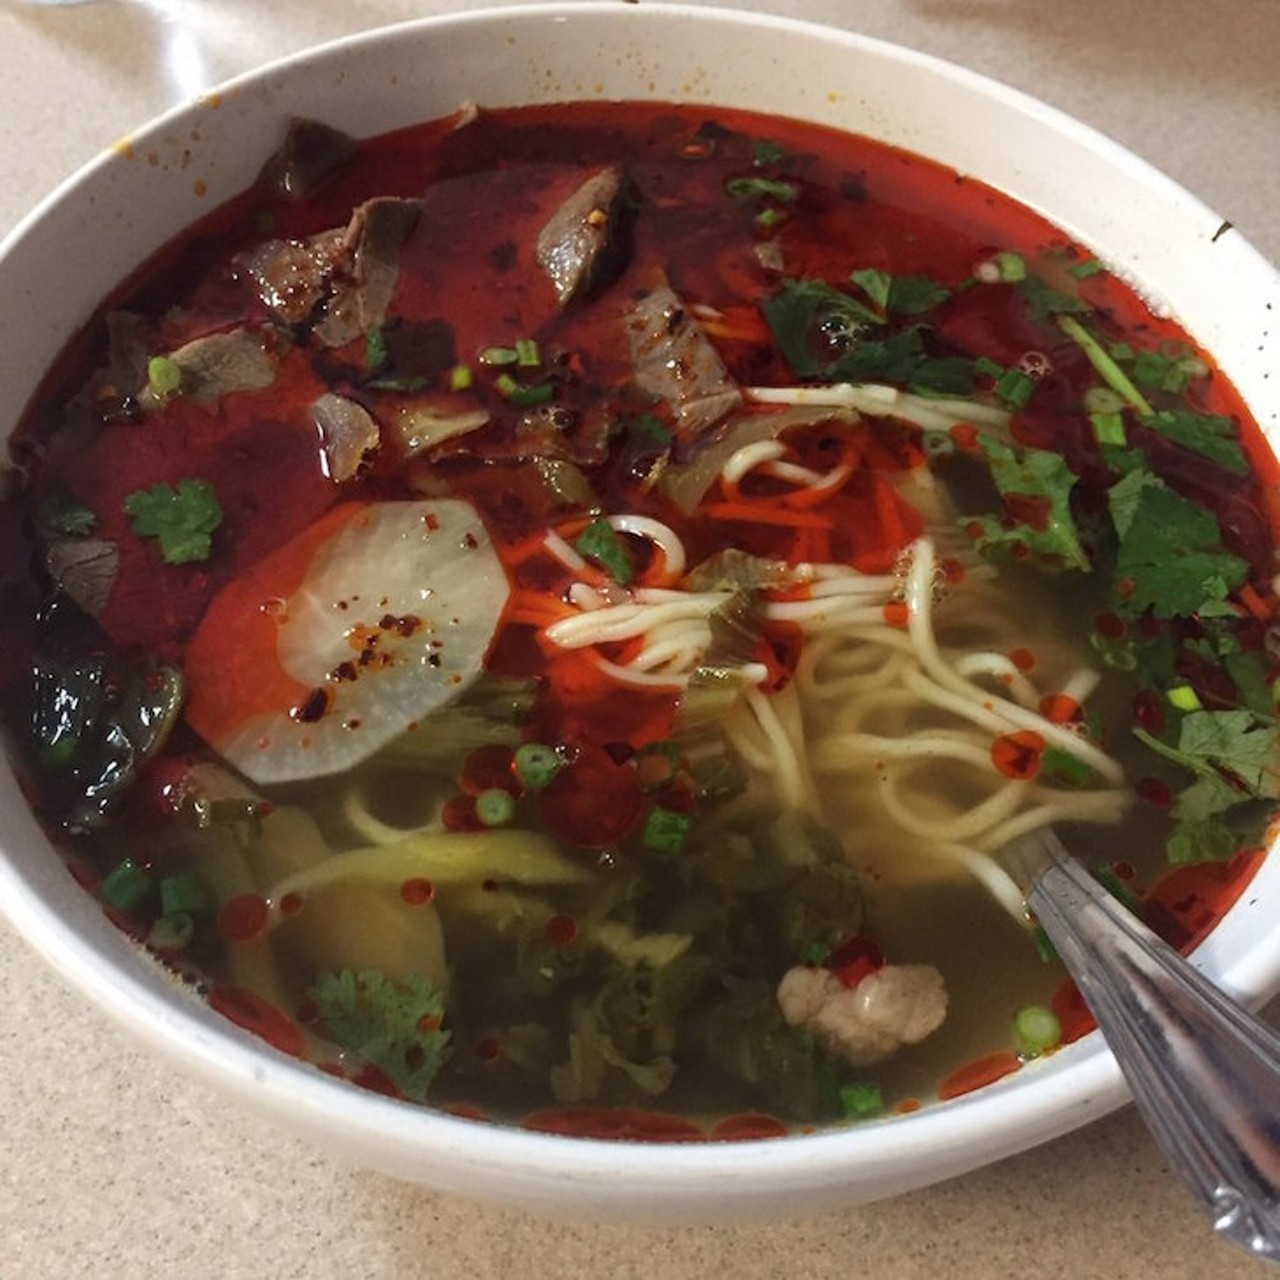 Spicy beef soup with hand-pulled noodles
Chuan Lu Garden, multiple locations
Photo via Yelp